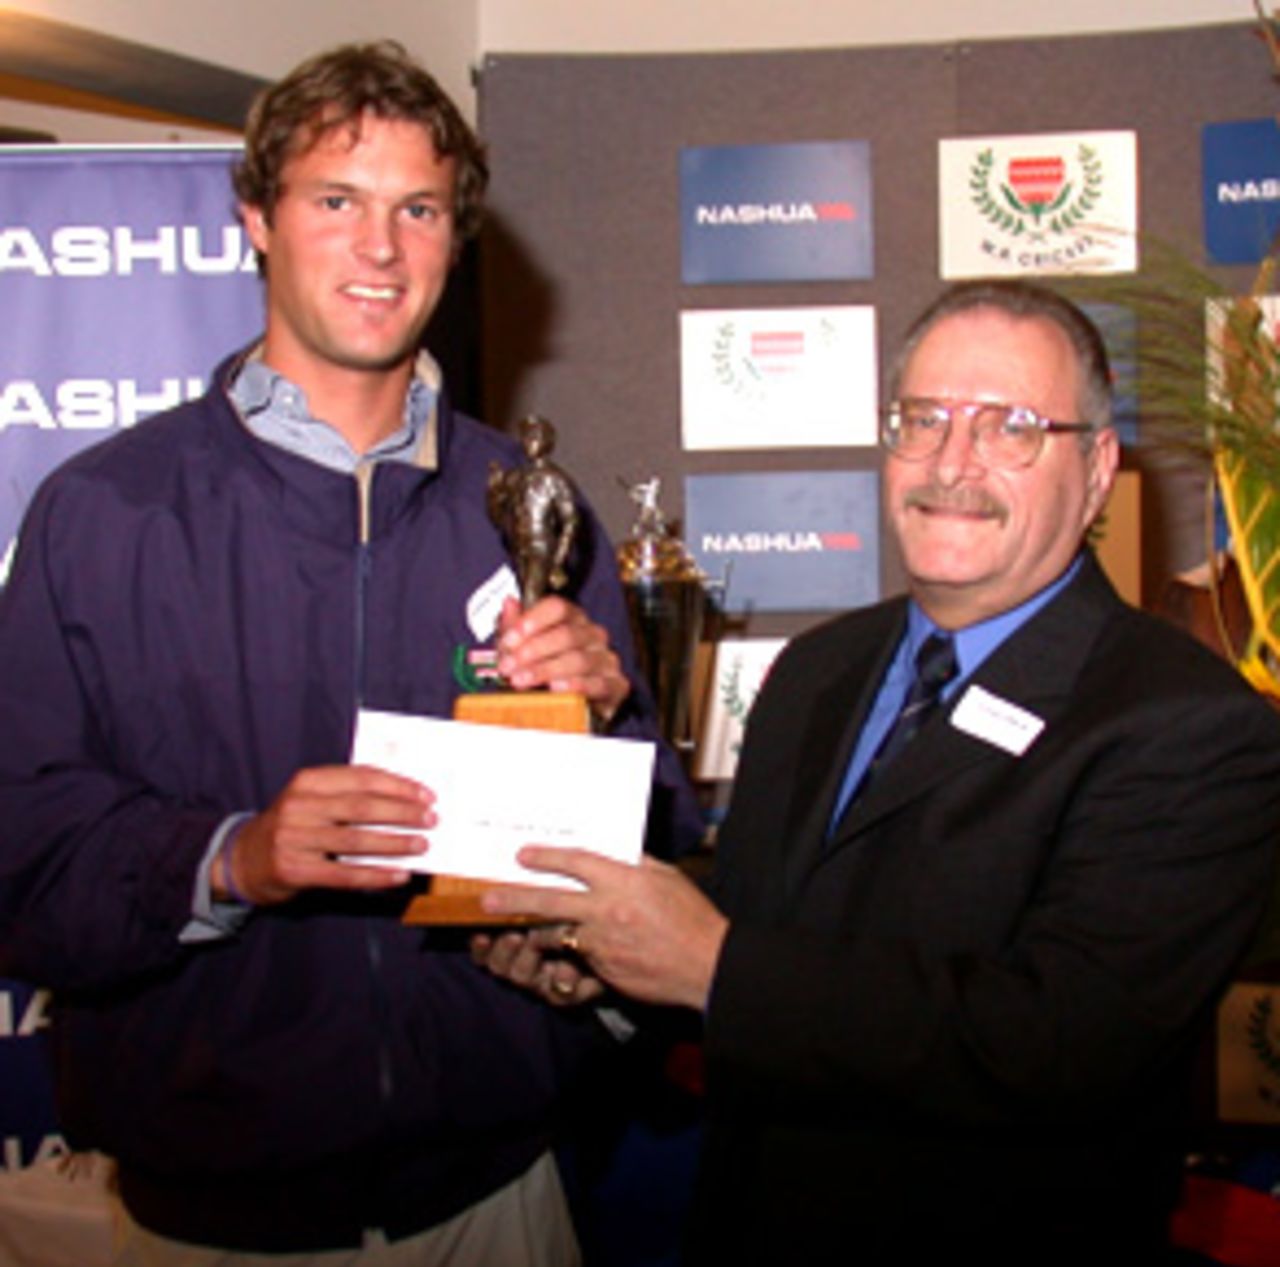 Nashua WP Young Player of the Season, Andrew Puttick receives his award from Arnold Bloch